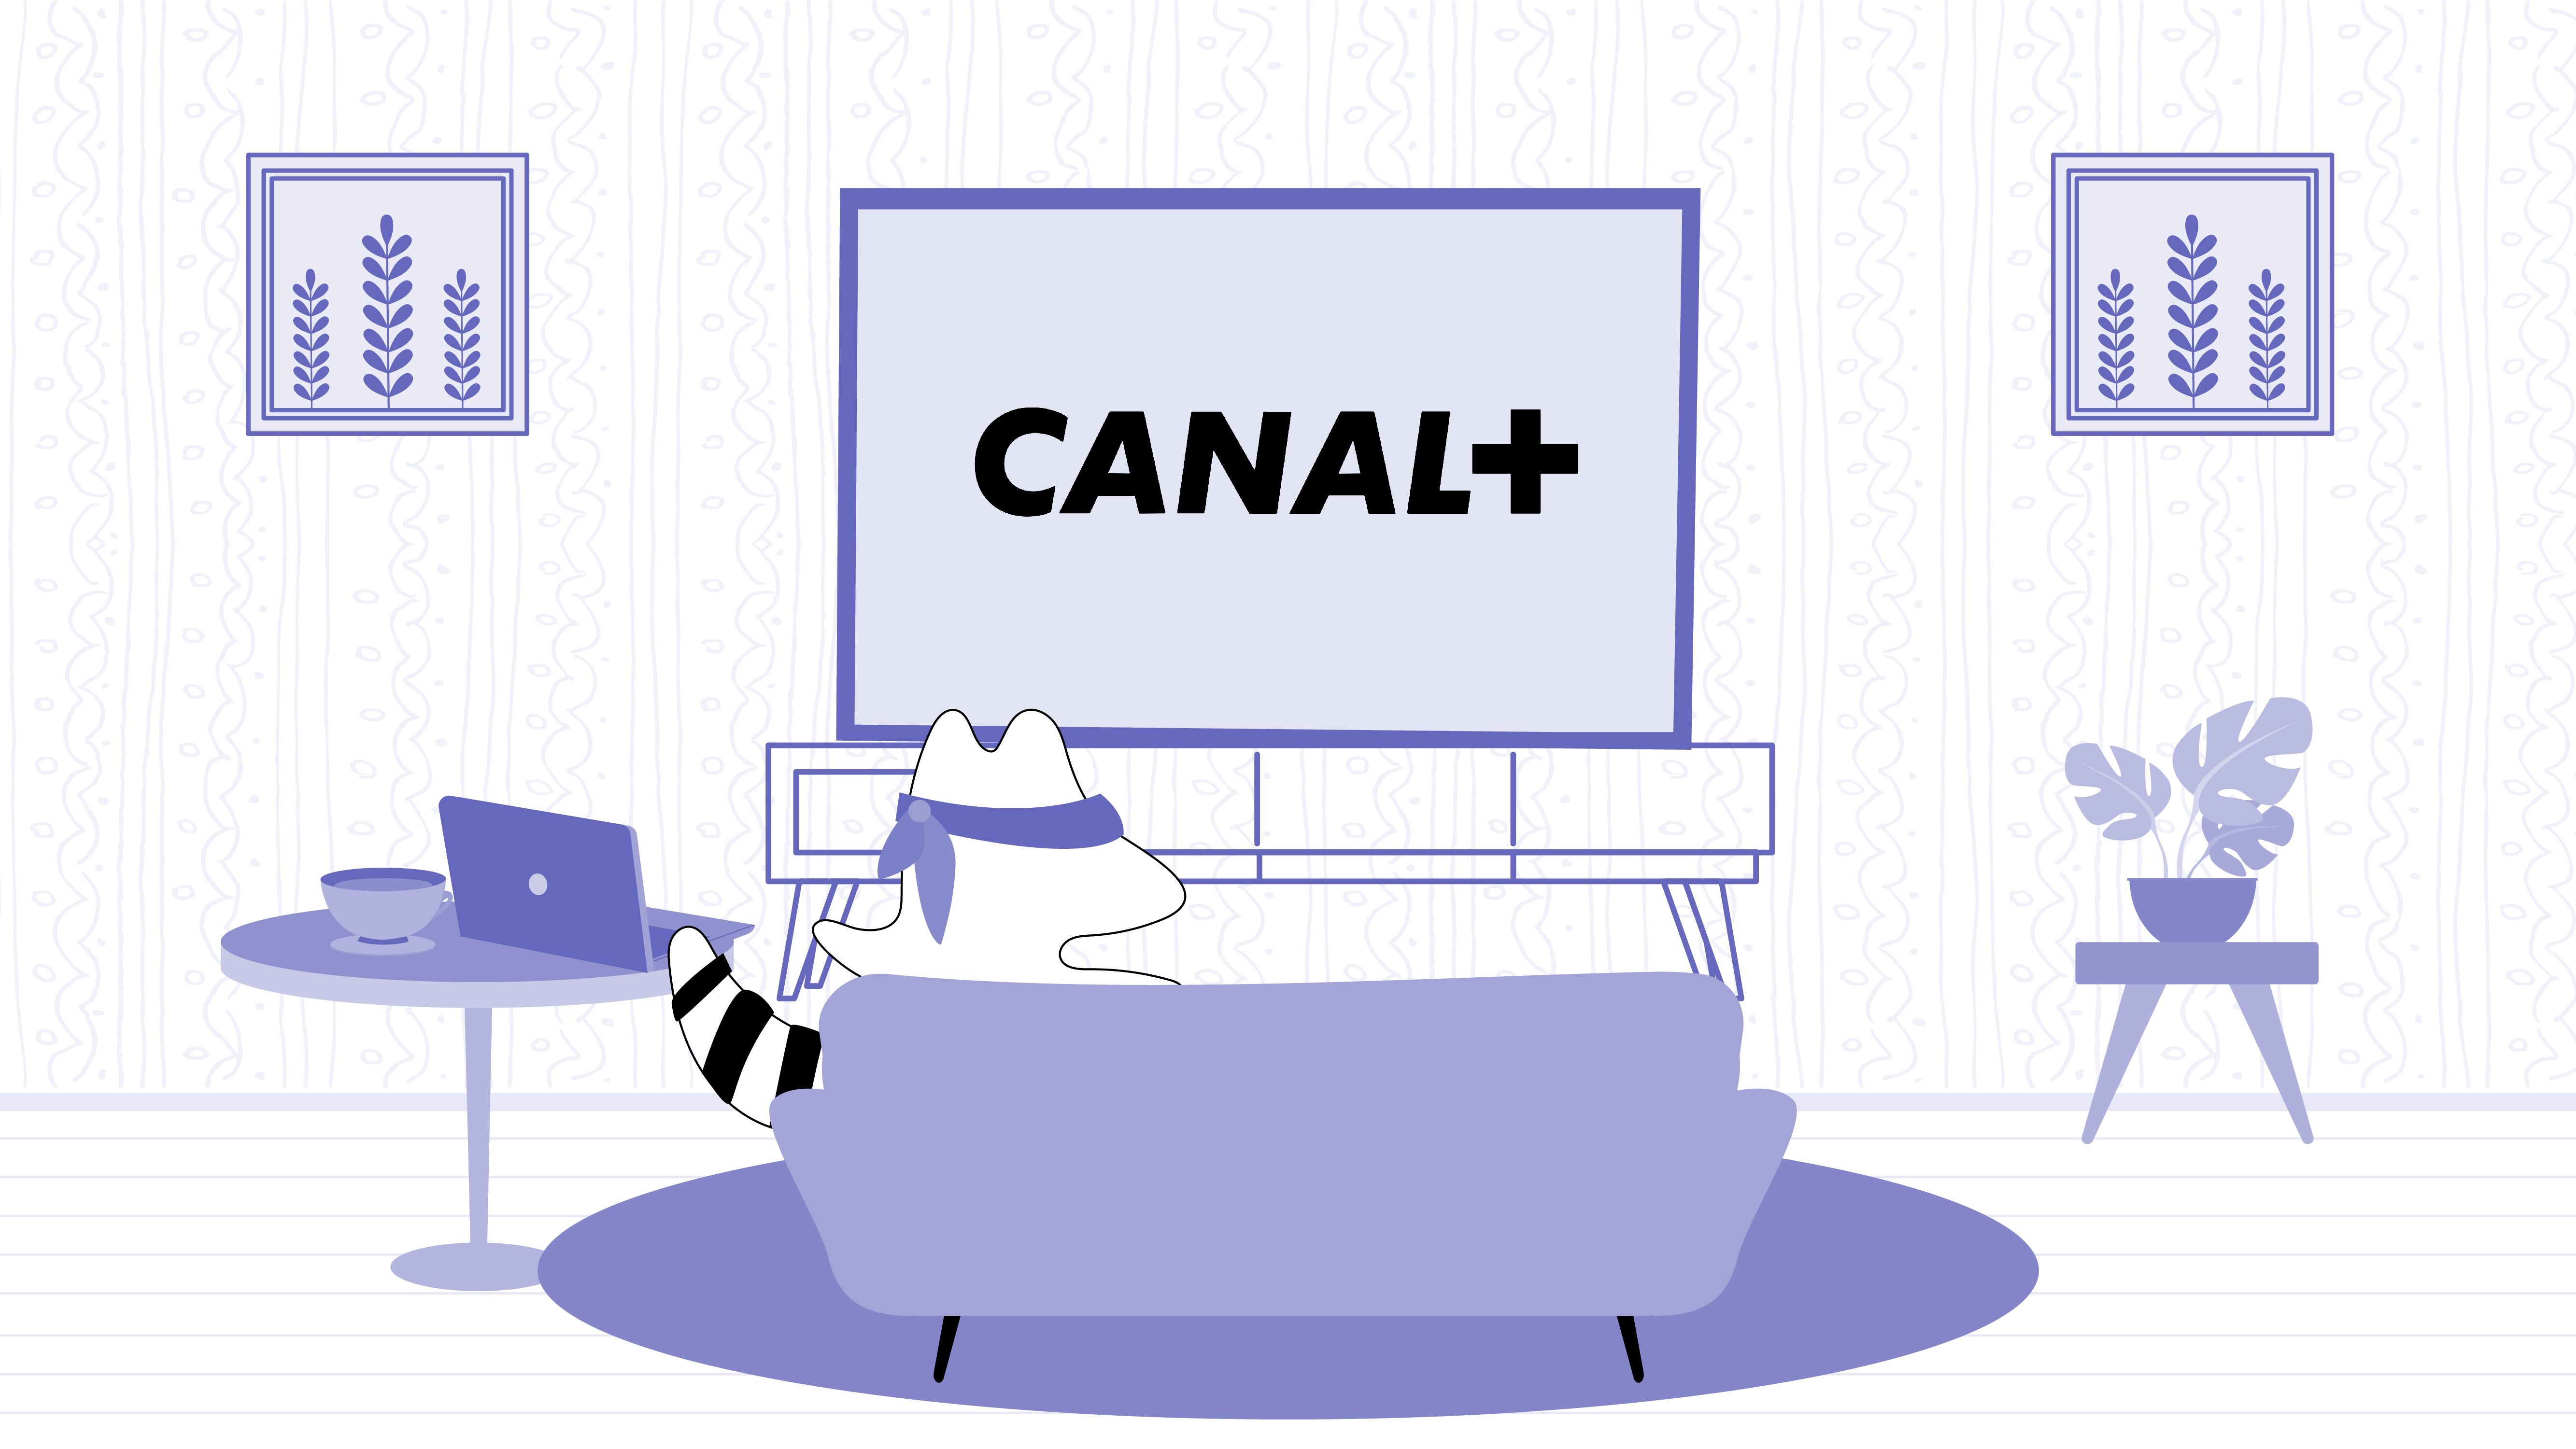 Iggy watches Canal+ using MyCanal streaming service.